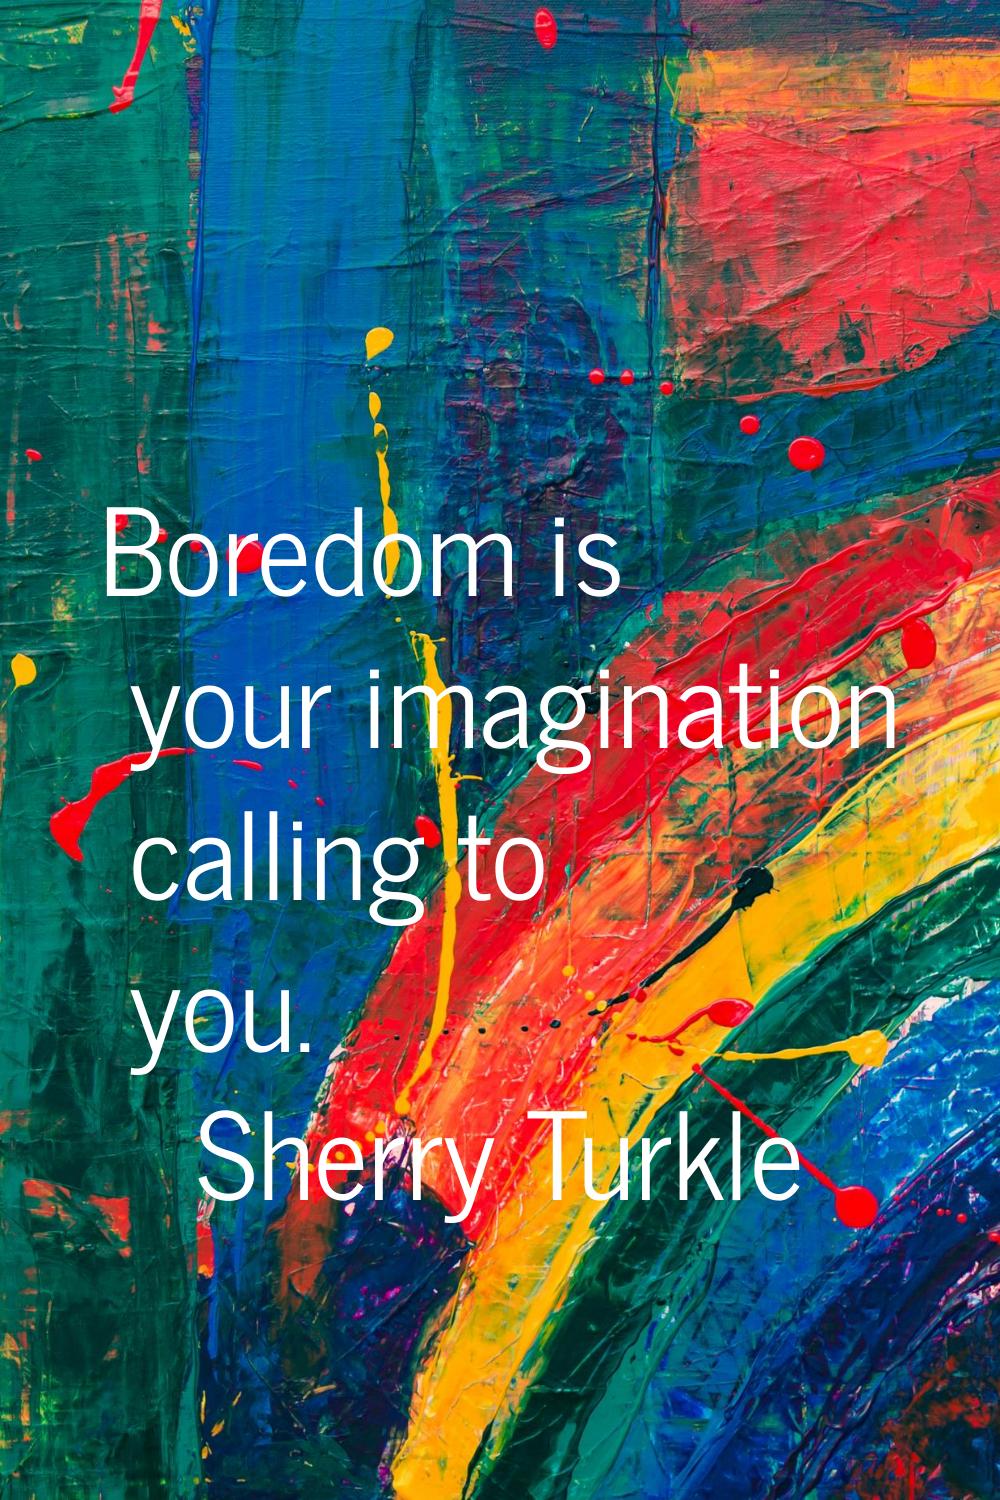 Boredom is your imagination calling to you.